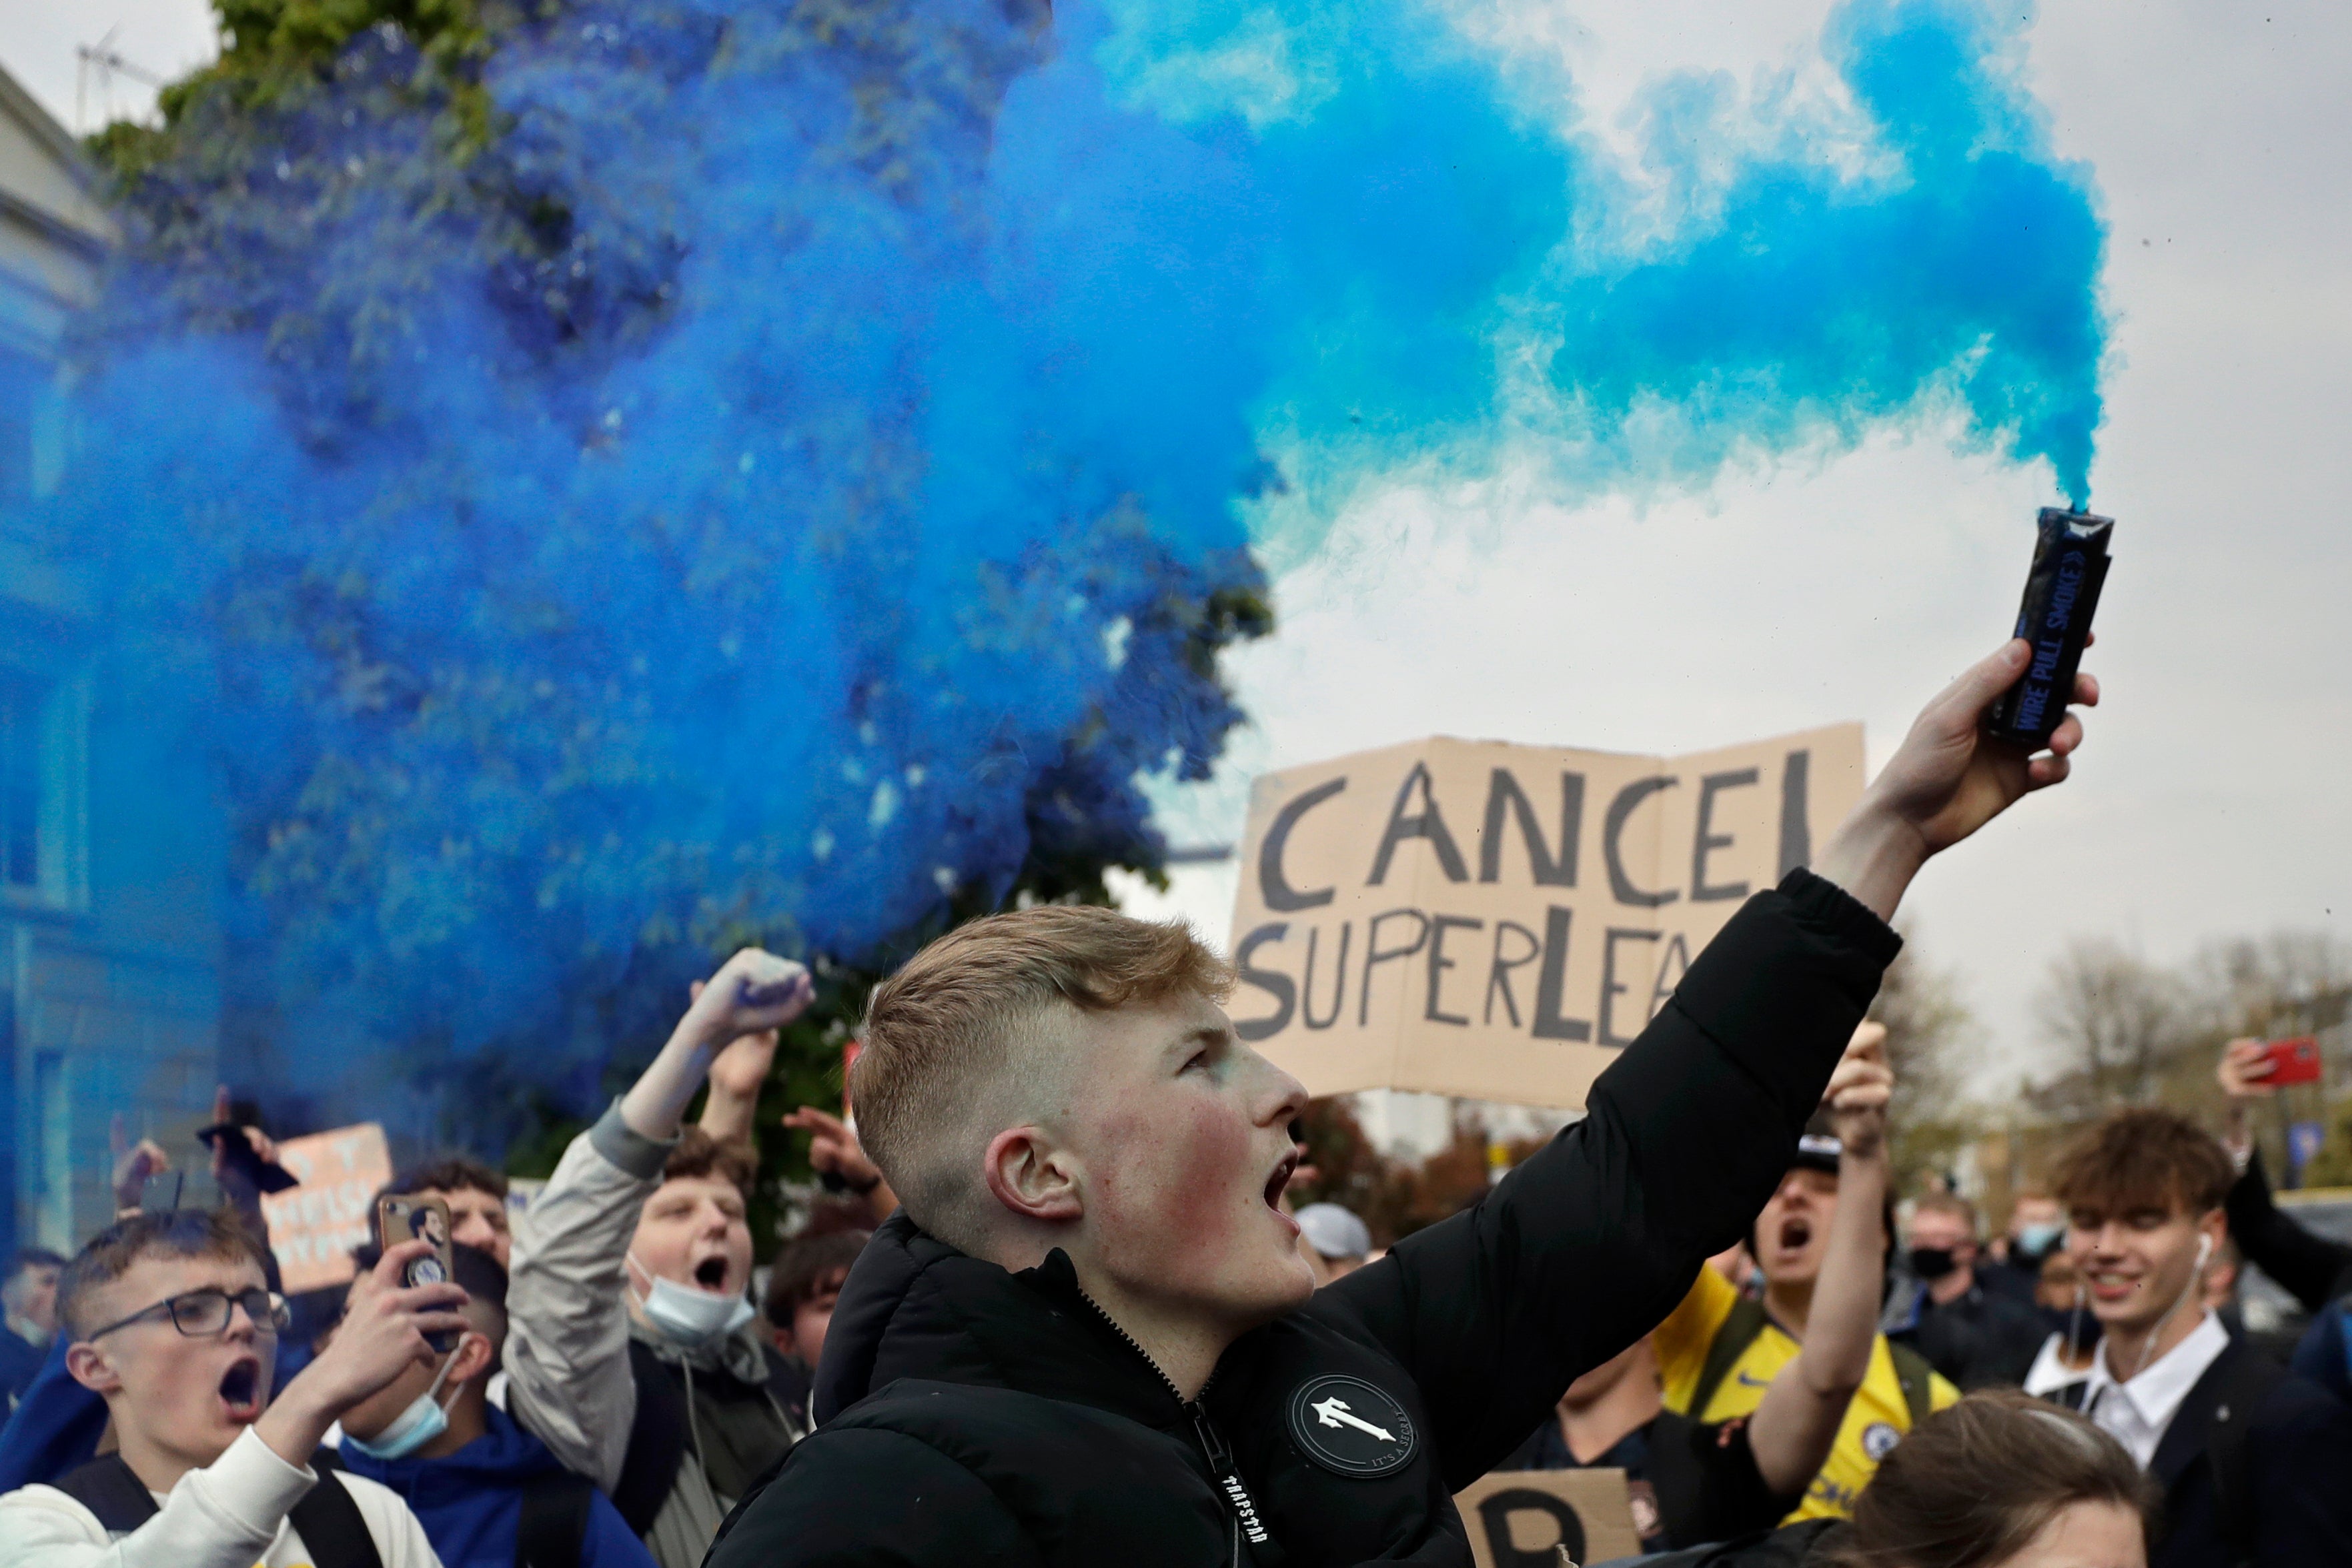 Fans across England protested against the proposed European Super League